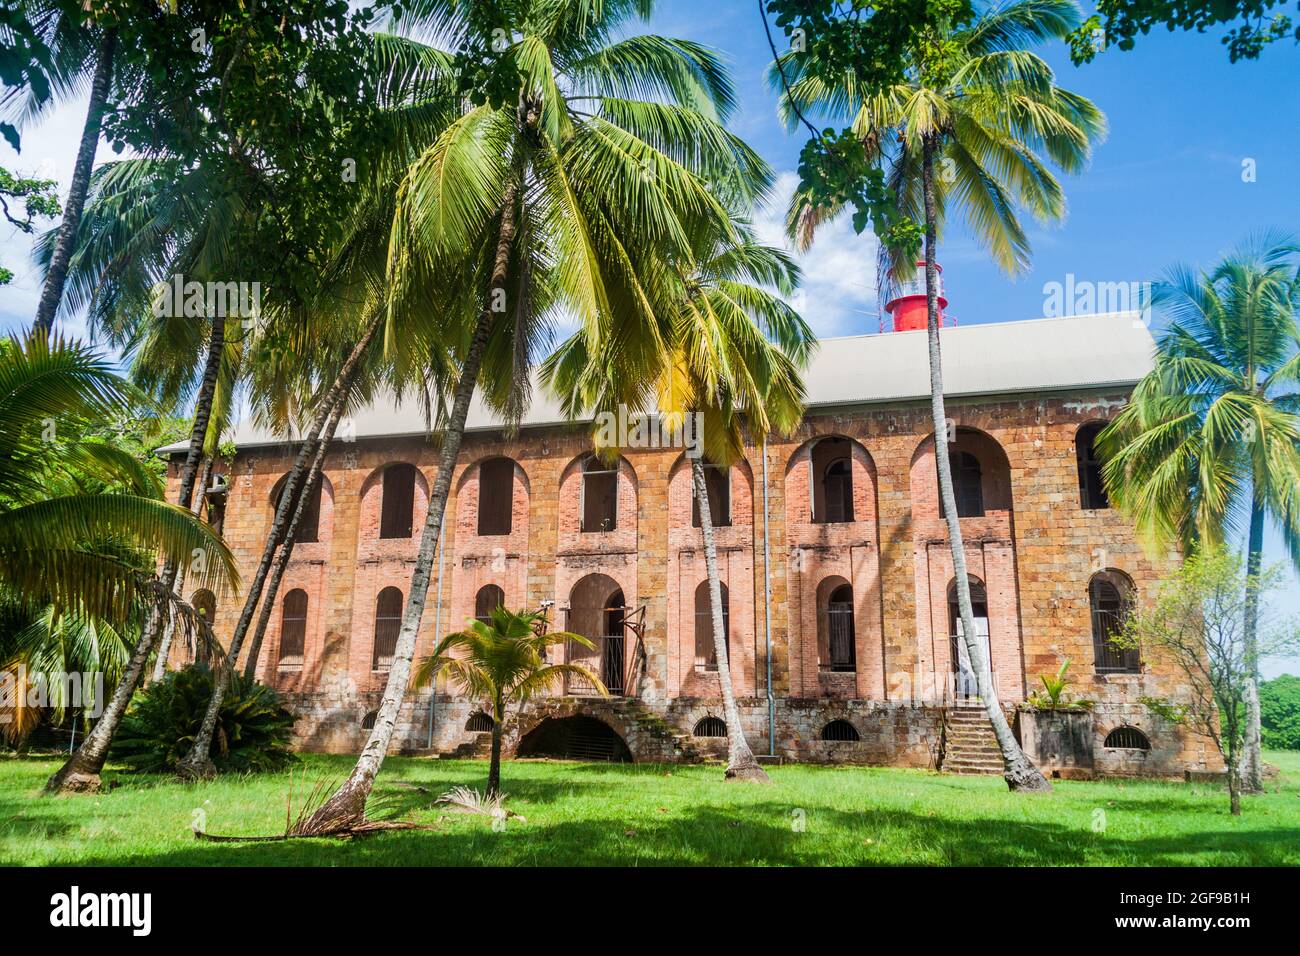 Former penal colony at Ile Royale, one of the islands of Iles du Salut (Islands of Salvation) in French Guiana Stock Photo